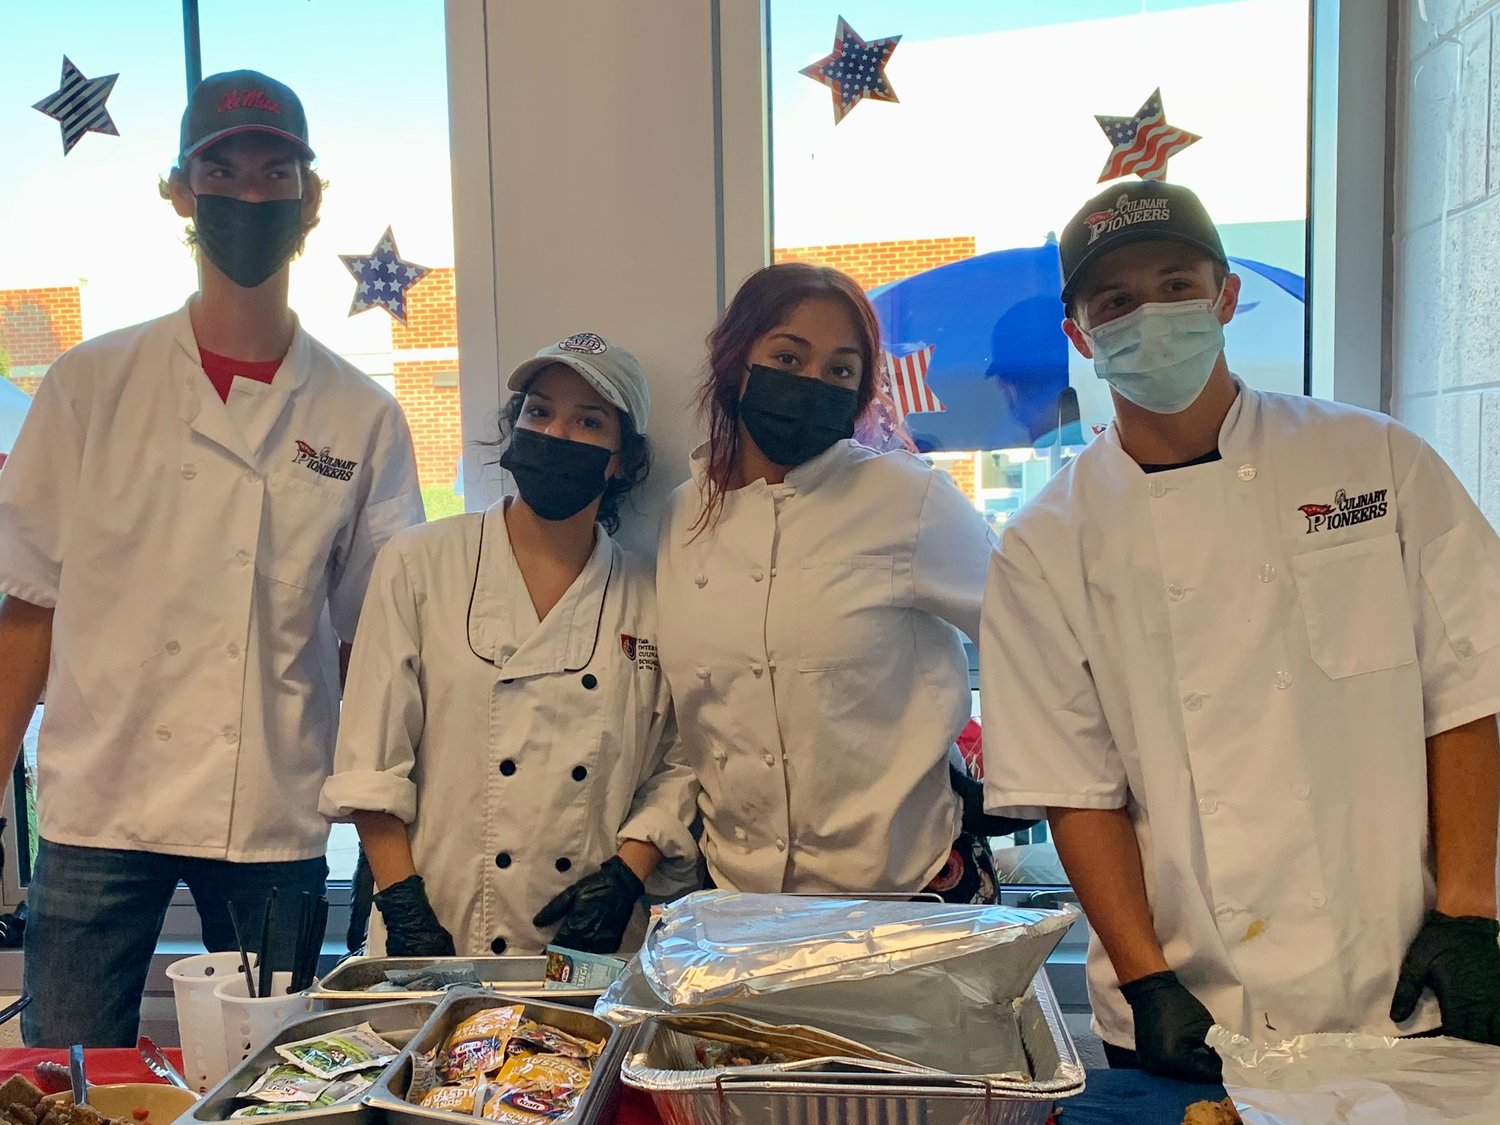 Patriot HS culinary students were excited to get back into the kitchen after a virtual year. They provided dinner to the VIP guests while other attendees got a "Taste of Bristow" from several local restaurants.